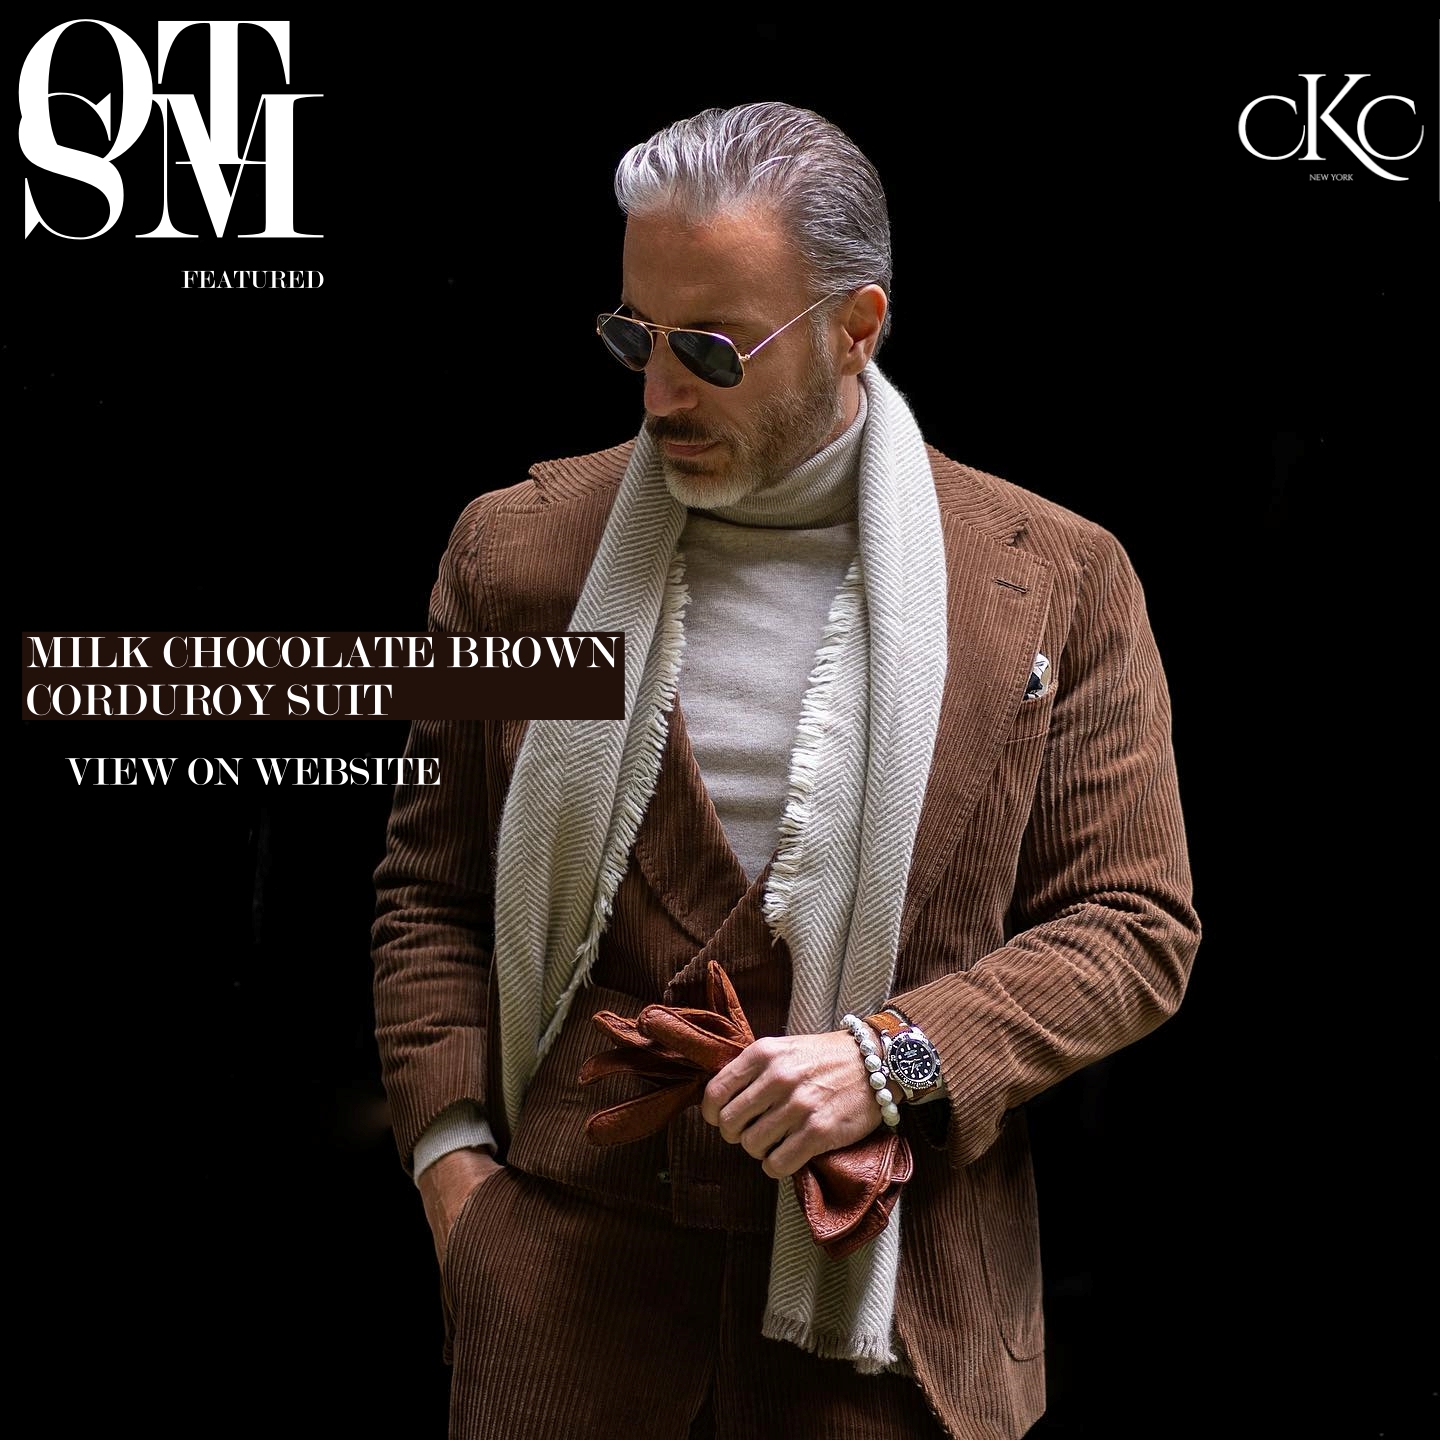 Men’s Fall Fashion Essentials: How to Wear Fall's Best Styles With CKC New York.